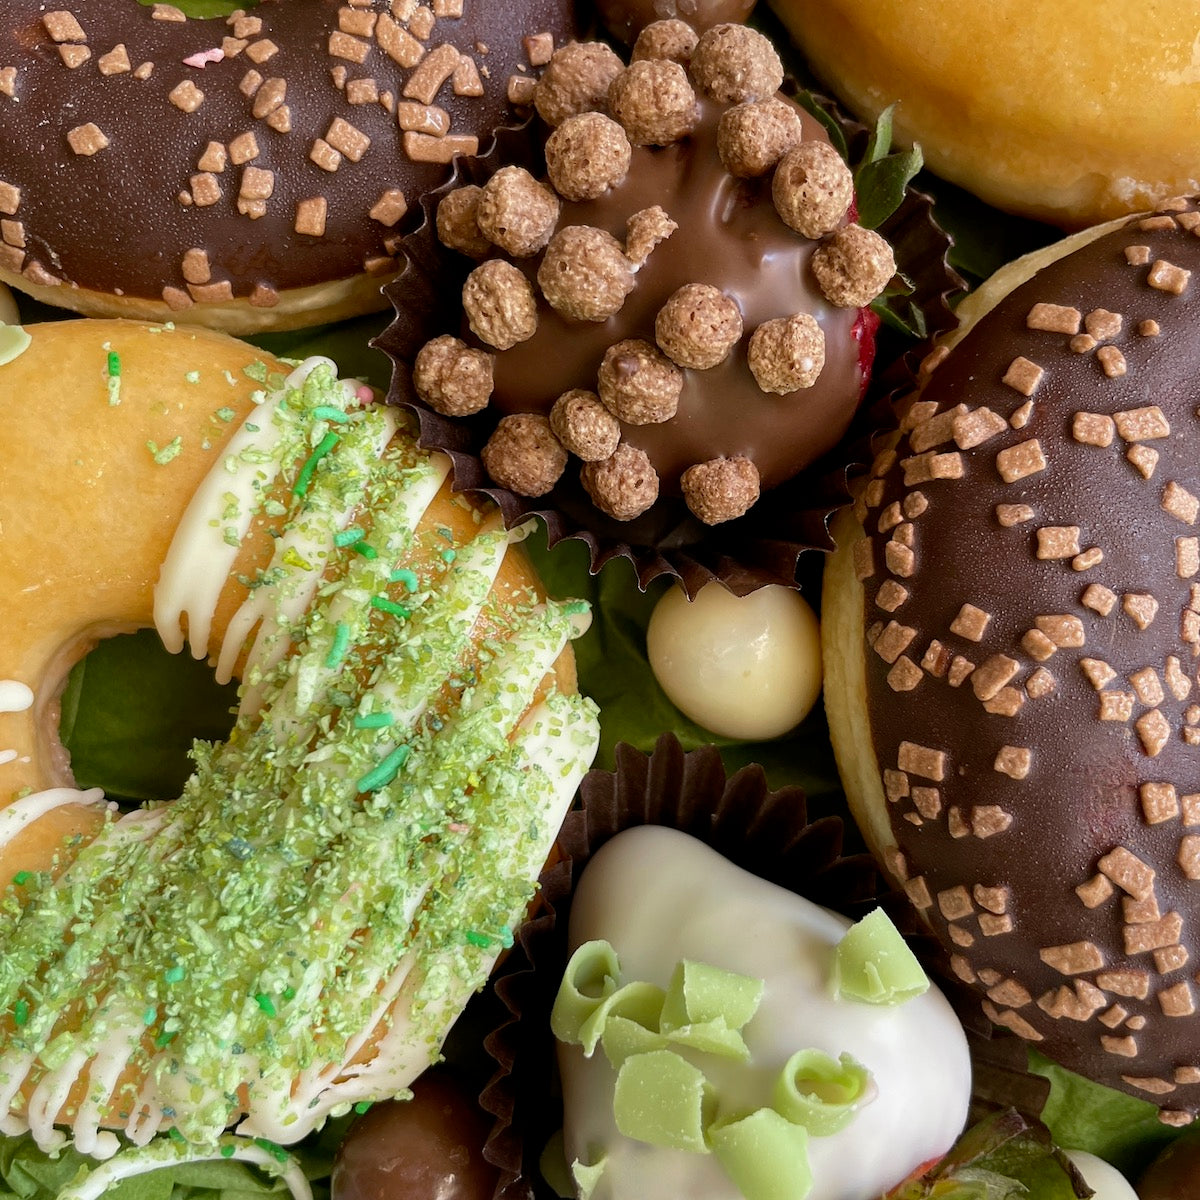 Heavenly donuts & chocolate strawberries - the perfect gift for any celebration.